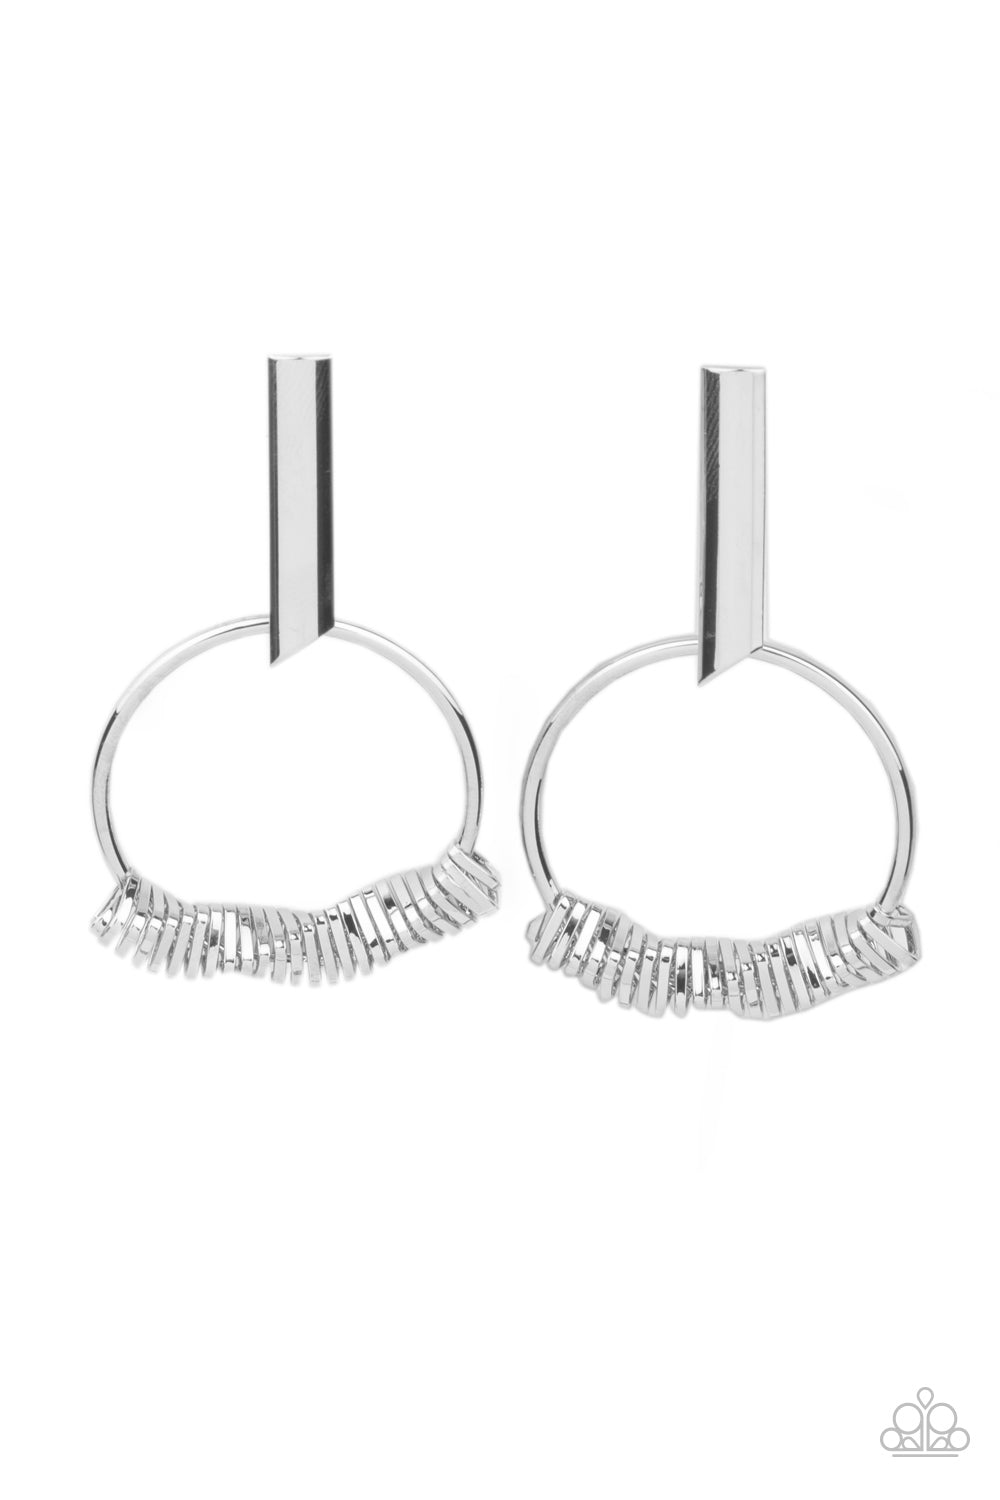 Paparazzi Earring - Set Into Motion - Silver